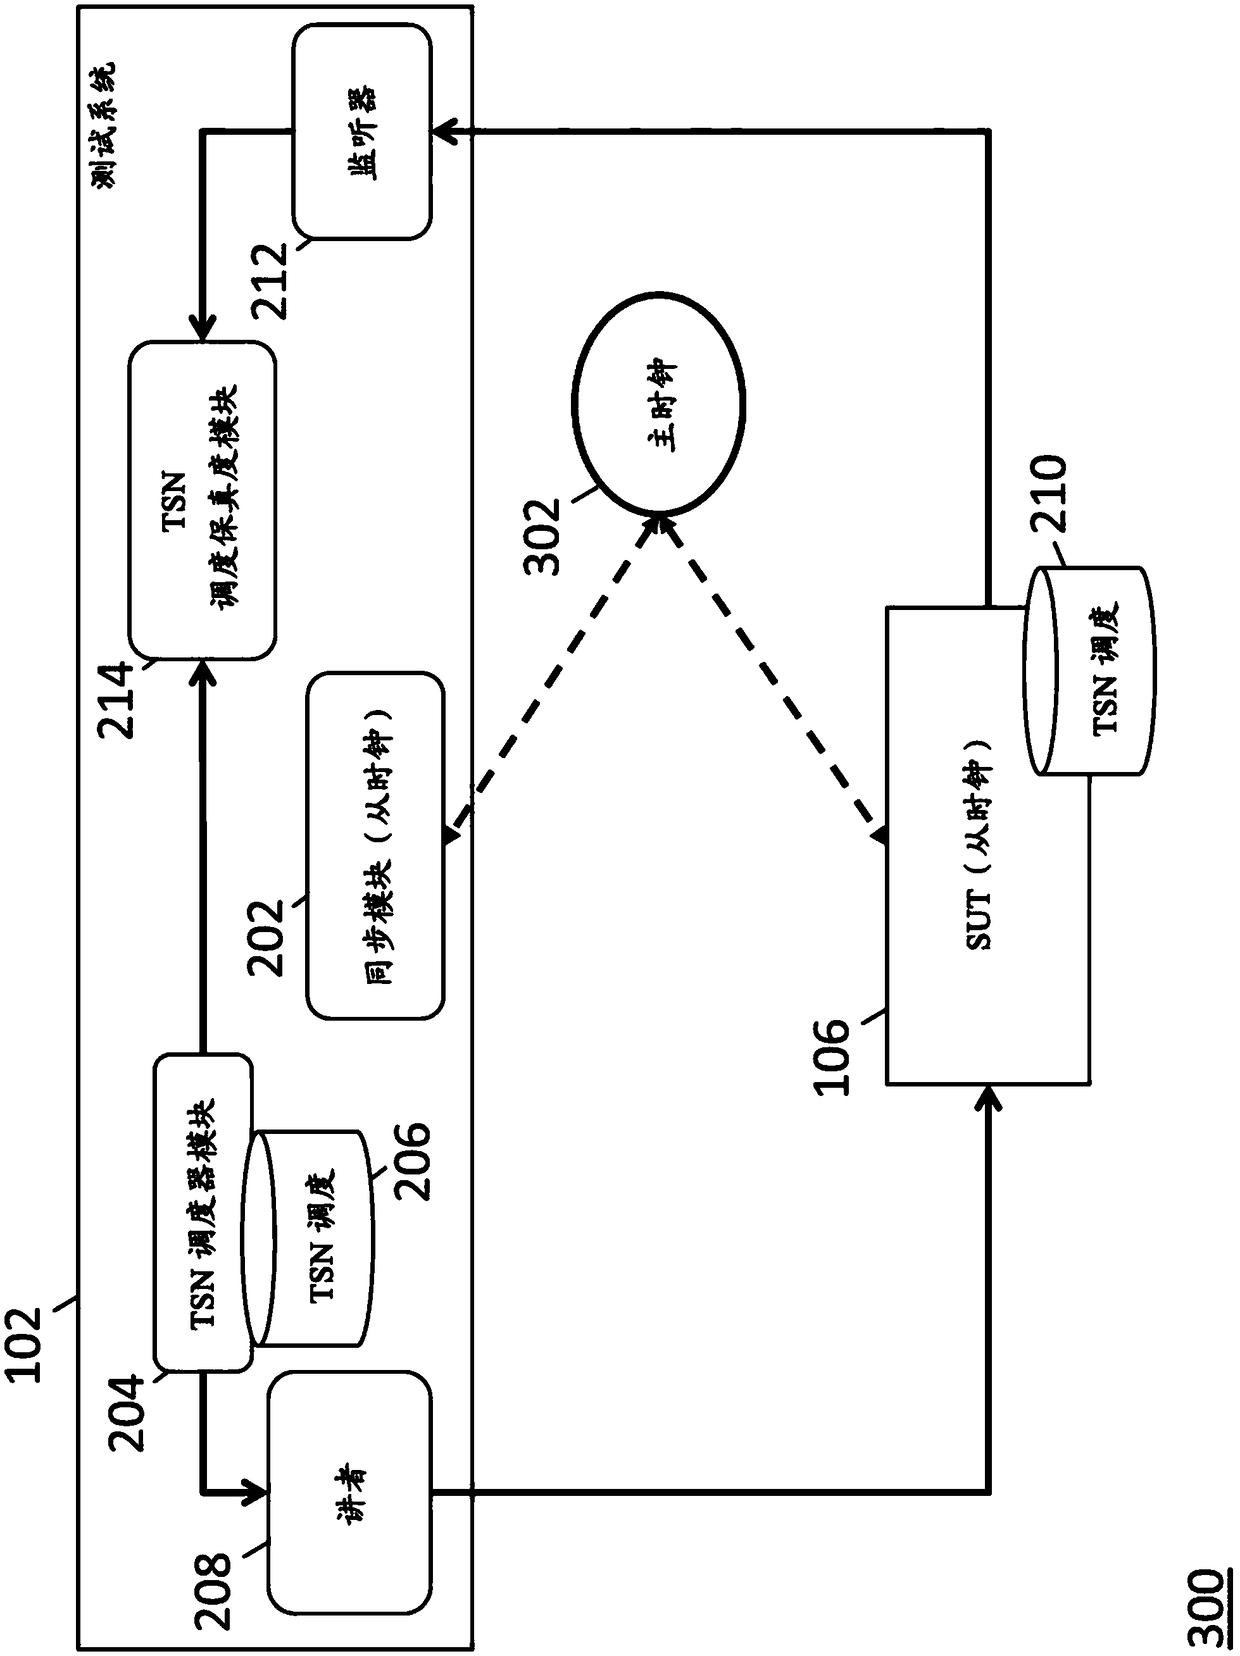 Methods, systems, and computer readable media for testing time sensitive network (TSN) elements